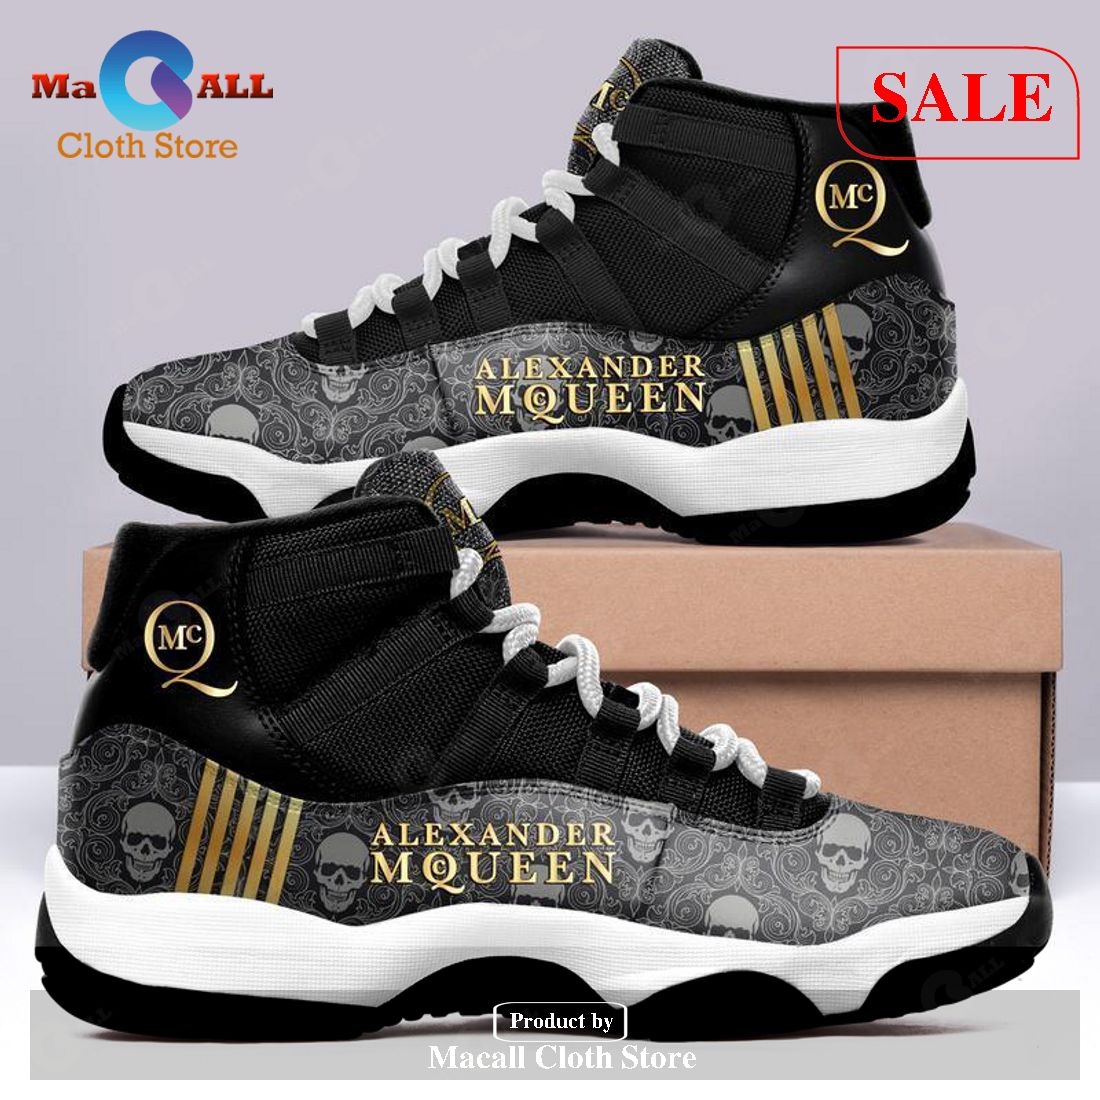 SALE] Alexander McQueen Air Jordan 11 Sneakers Shoes Hot 2023 Gifts For Men  Women POD Design - Macall Cloth Store - Destination for fashionistas